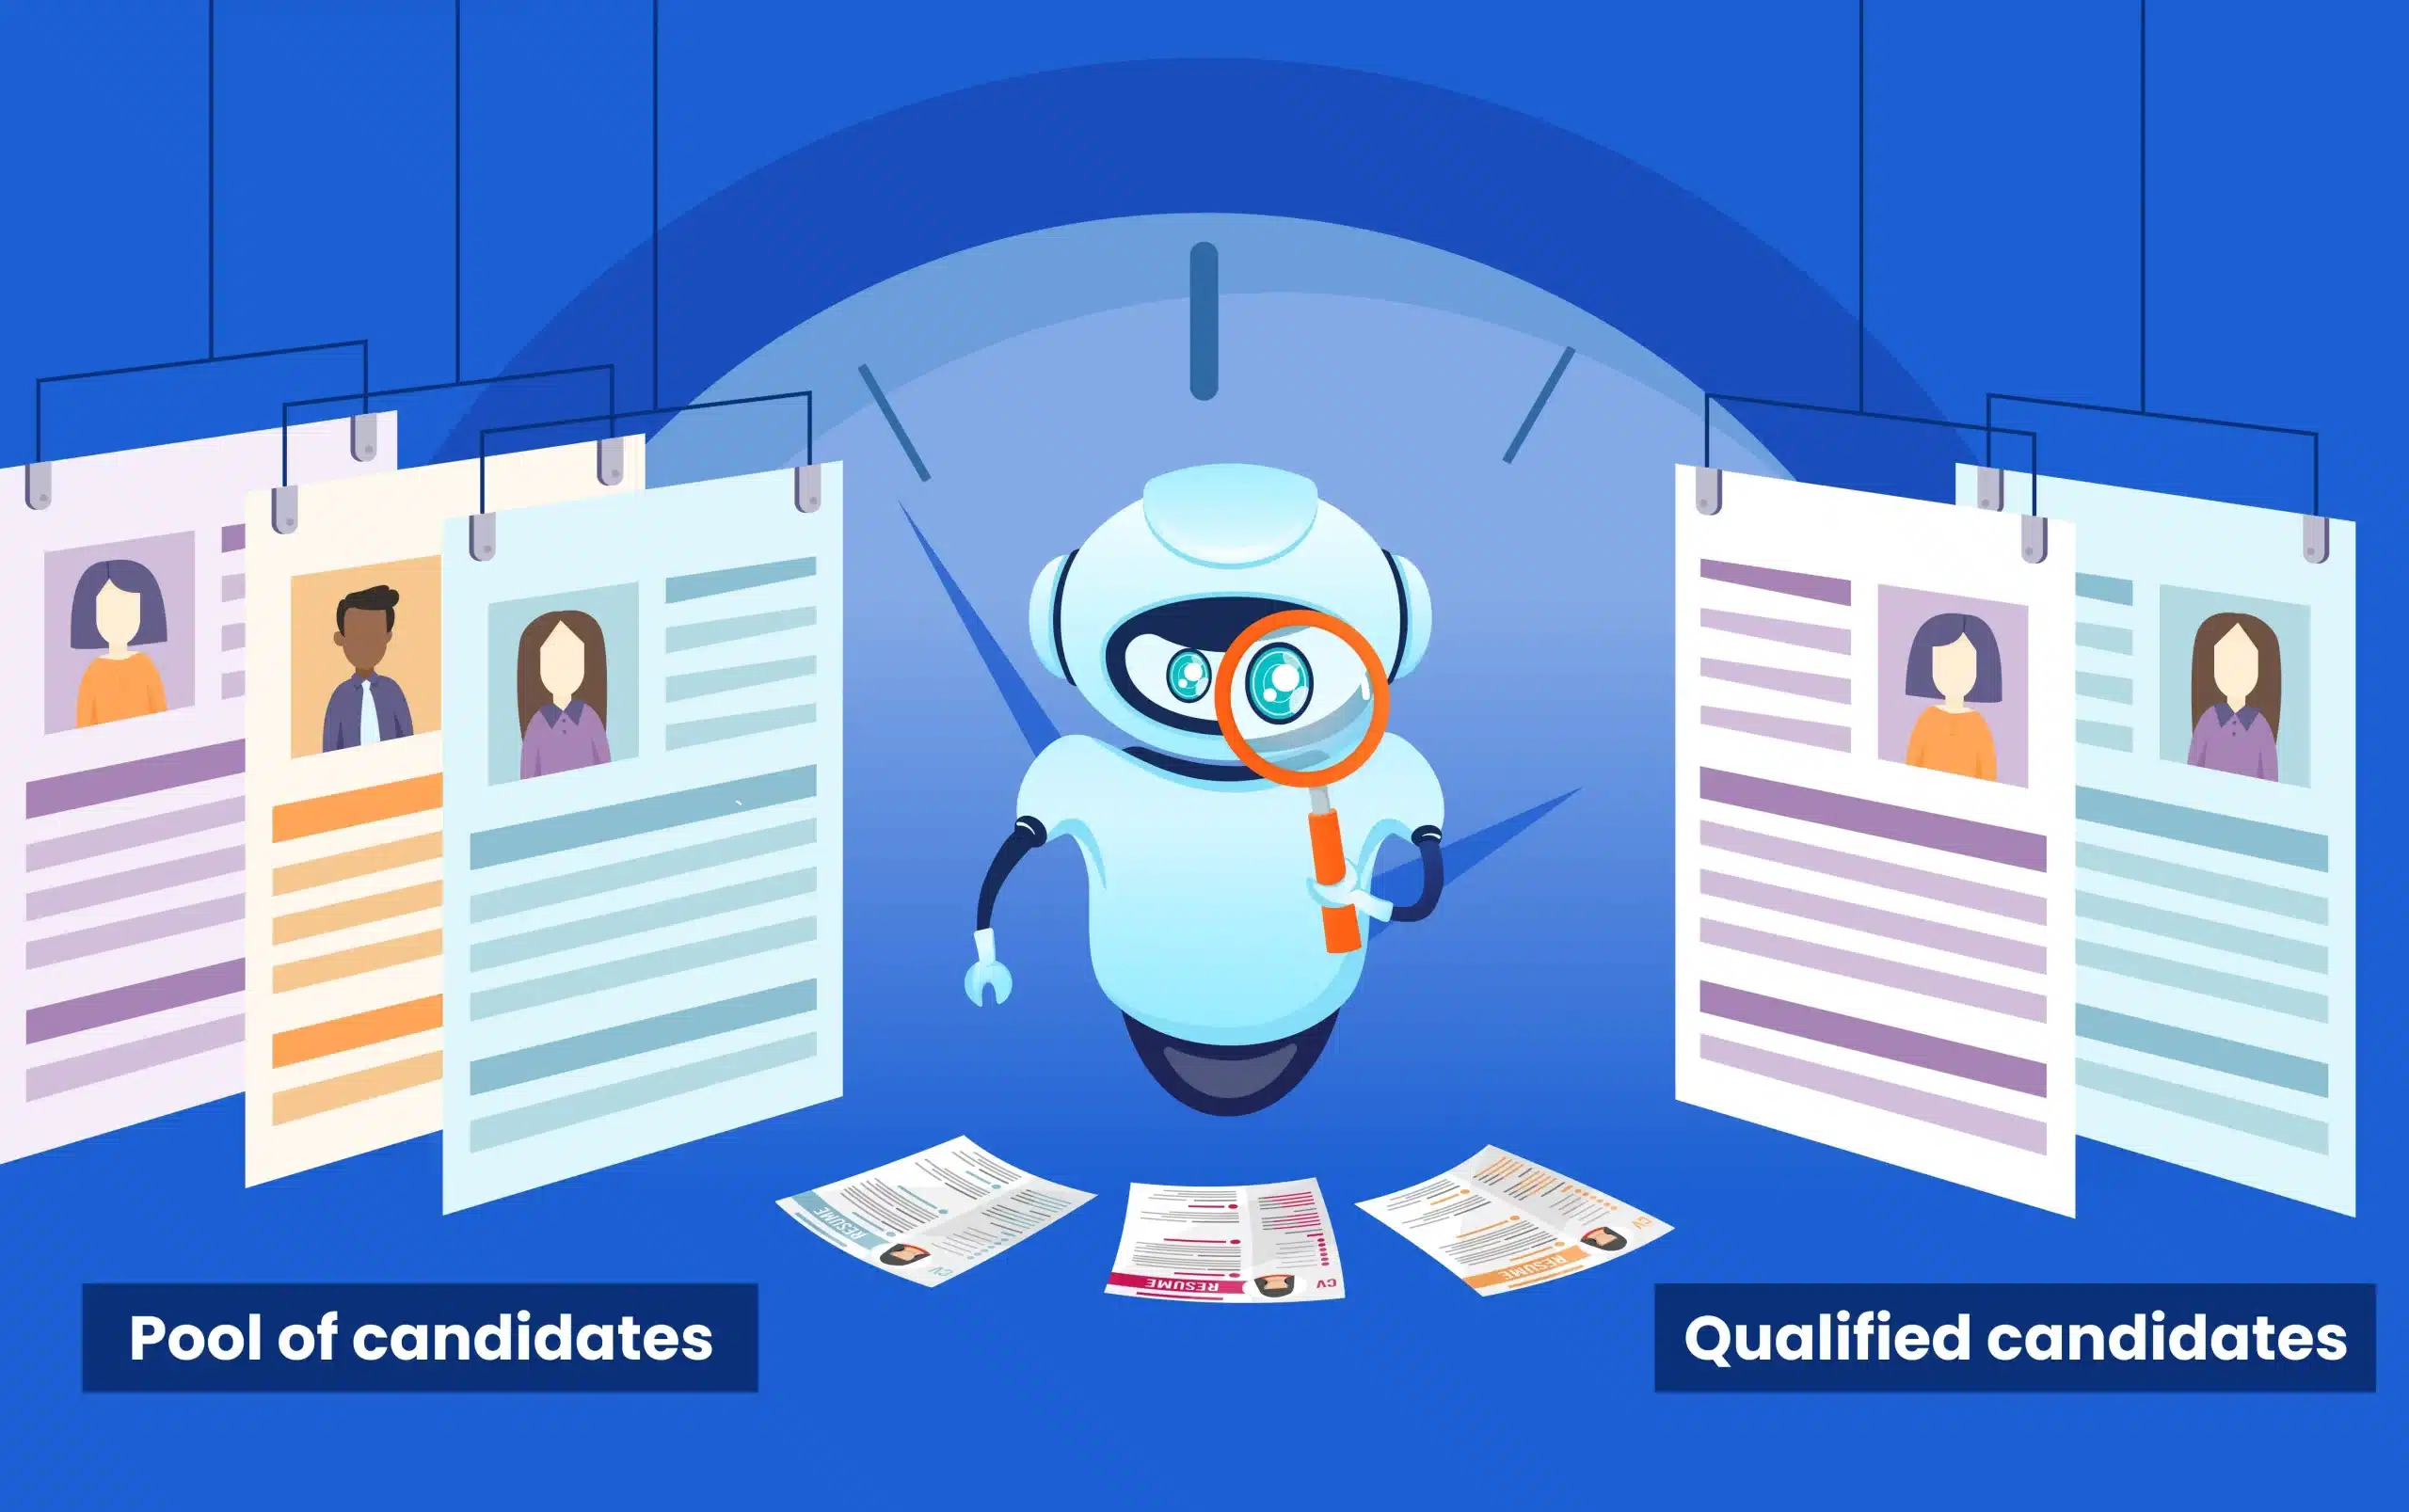 Qualified candidates